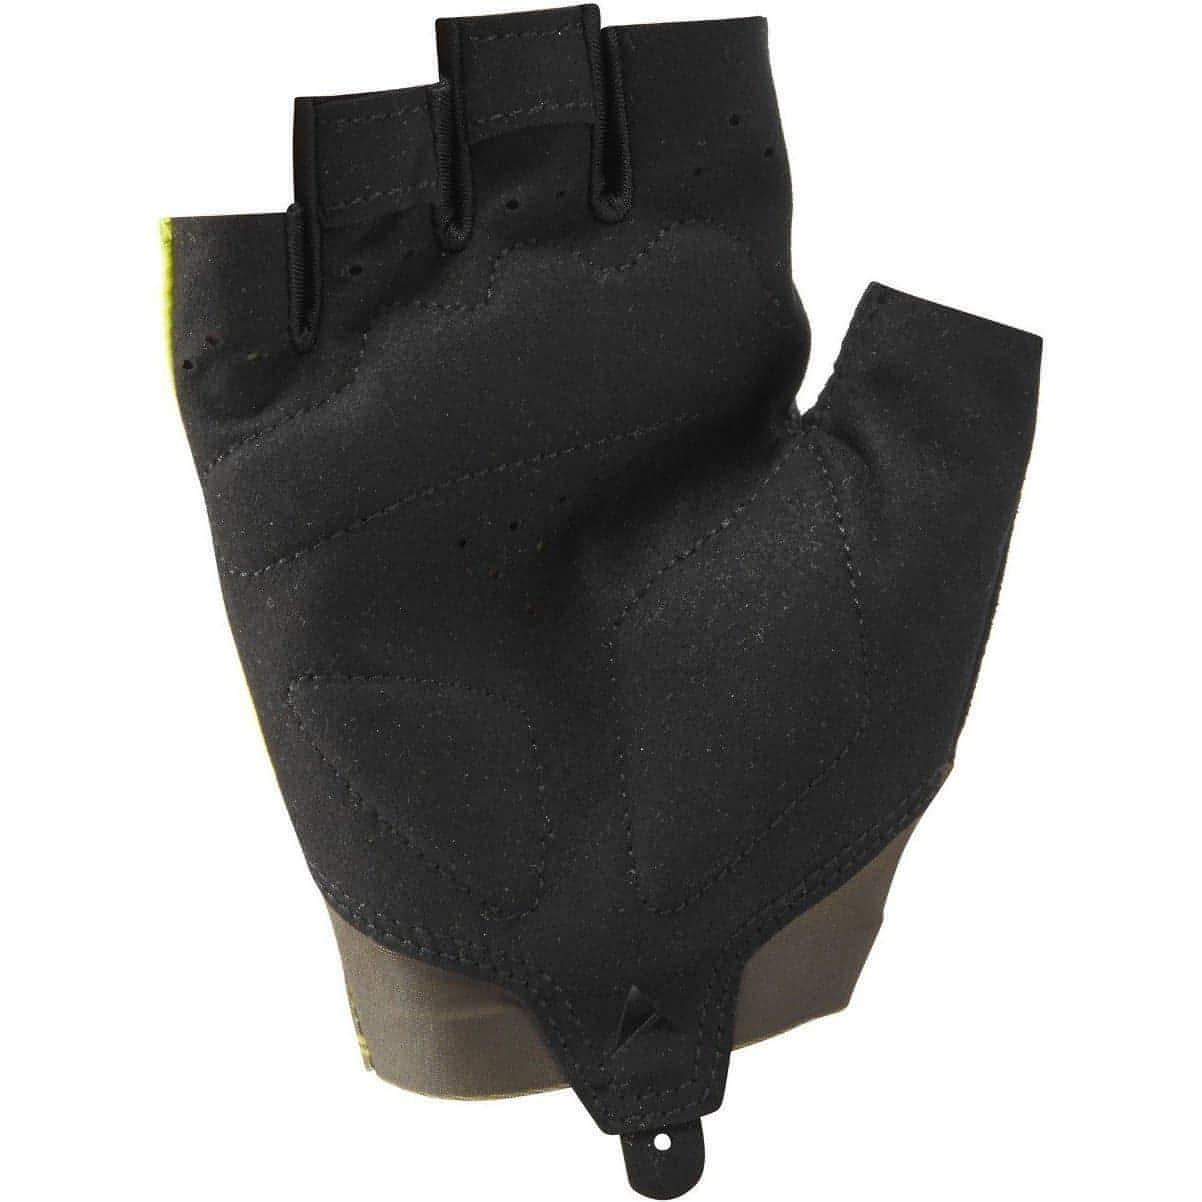 Altura Airstream Road Fingerless Cycling Gloves - Yellow - Start Fitness